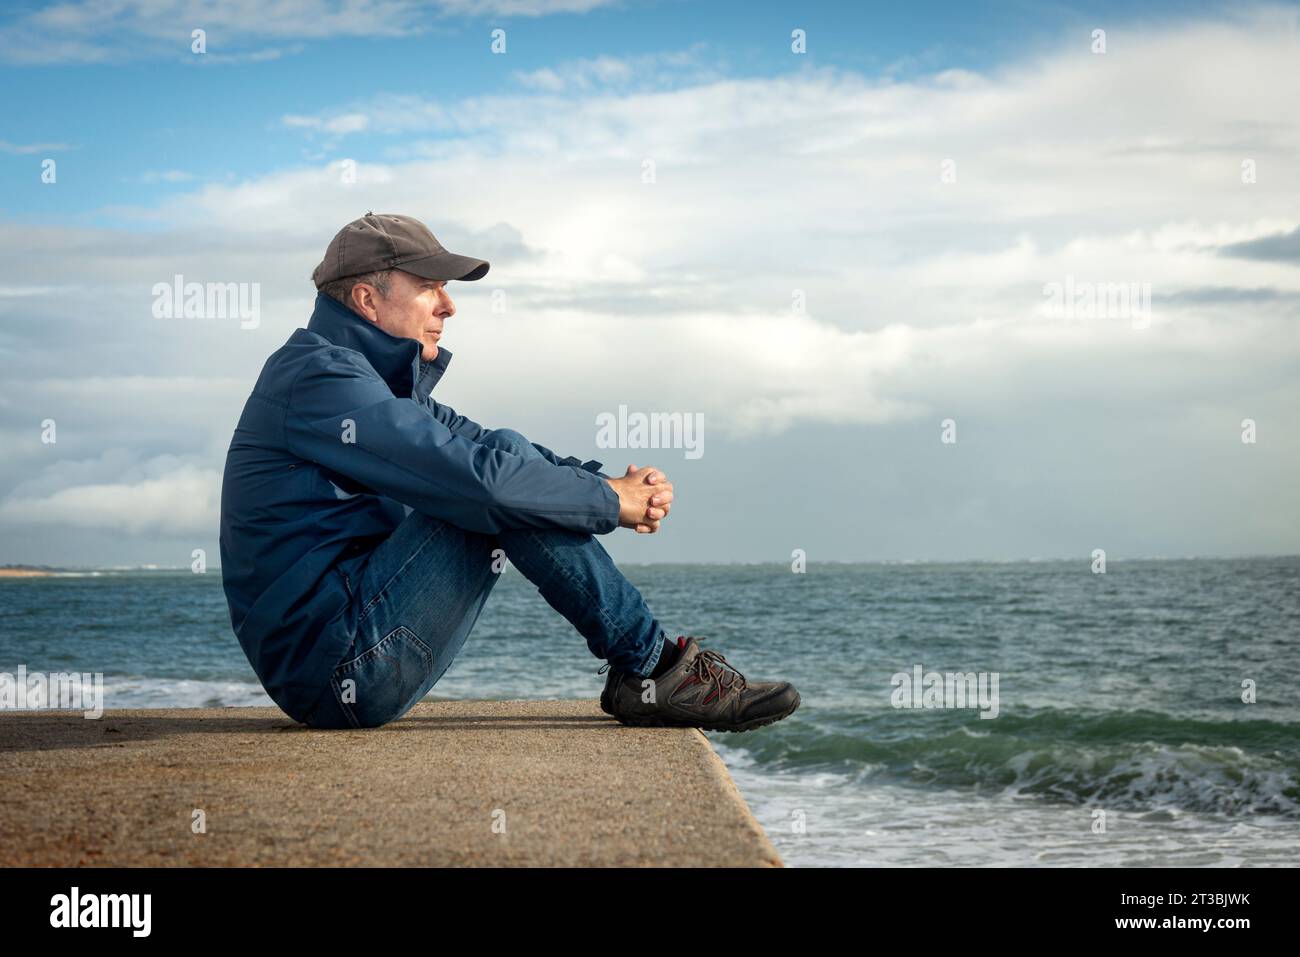 man sitting looking out over the ocean. Enjoying peace in nature. Contemplation. Stock Photo